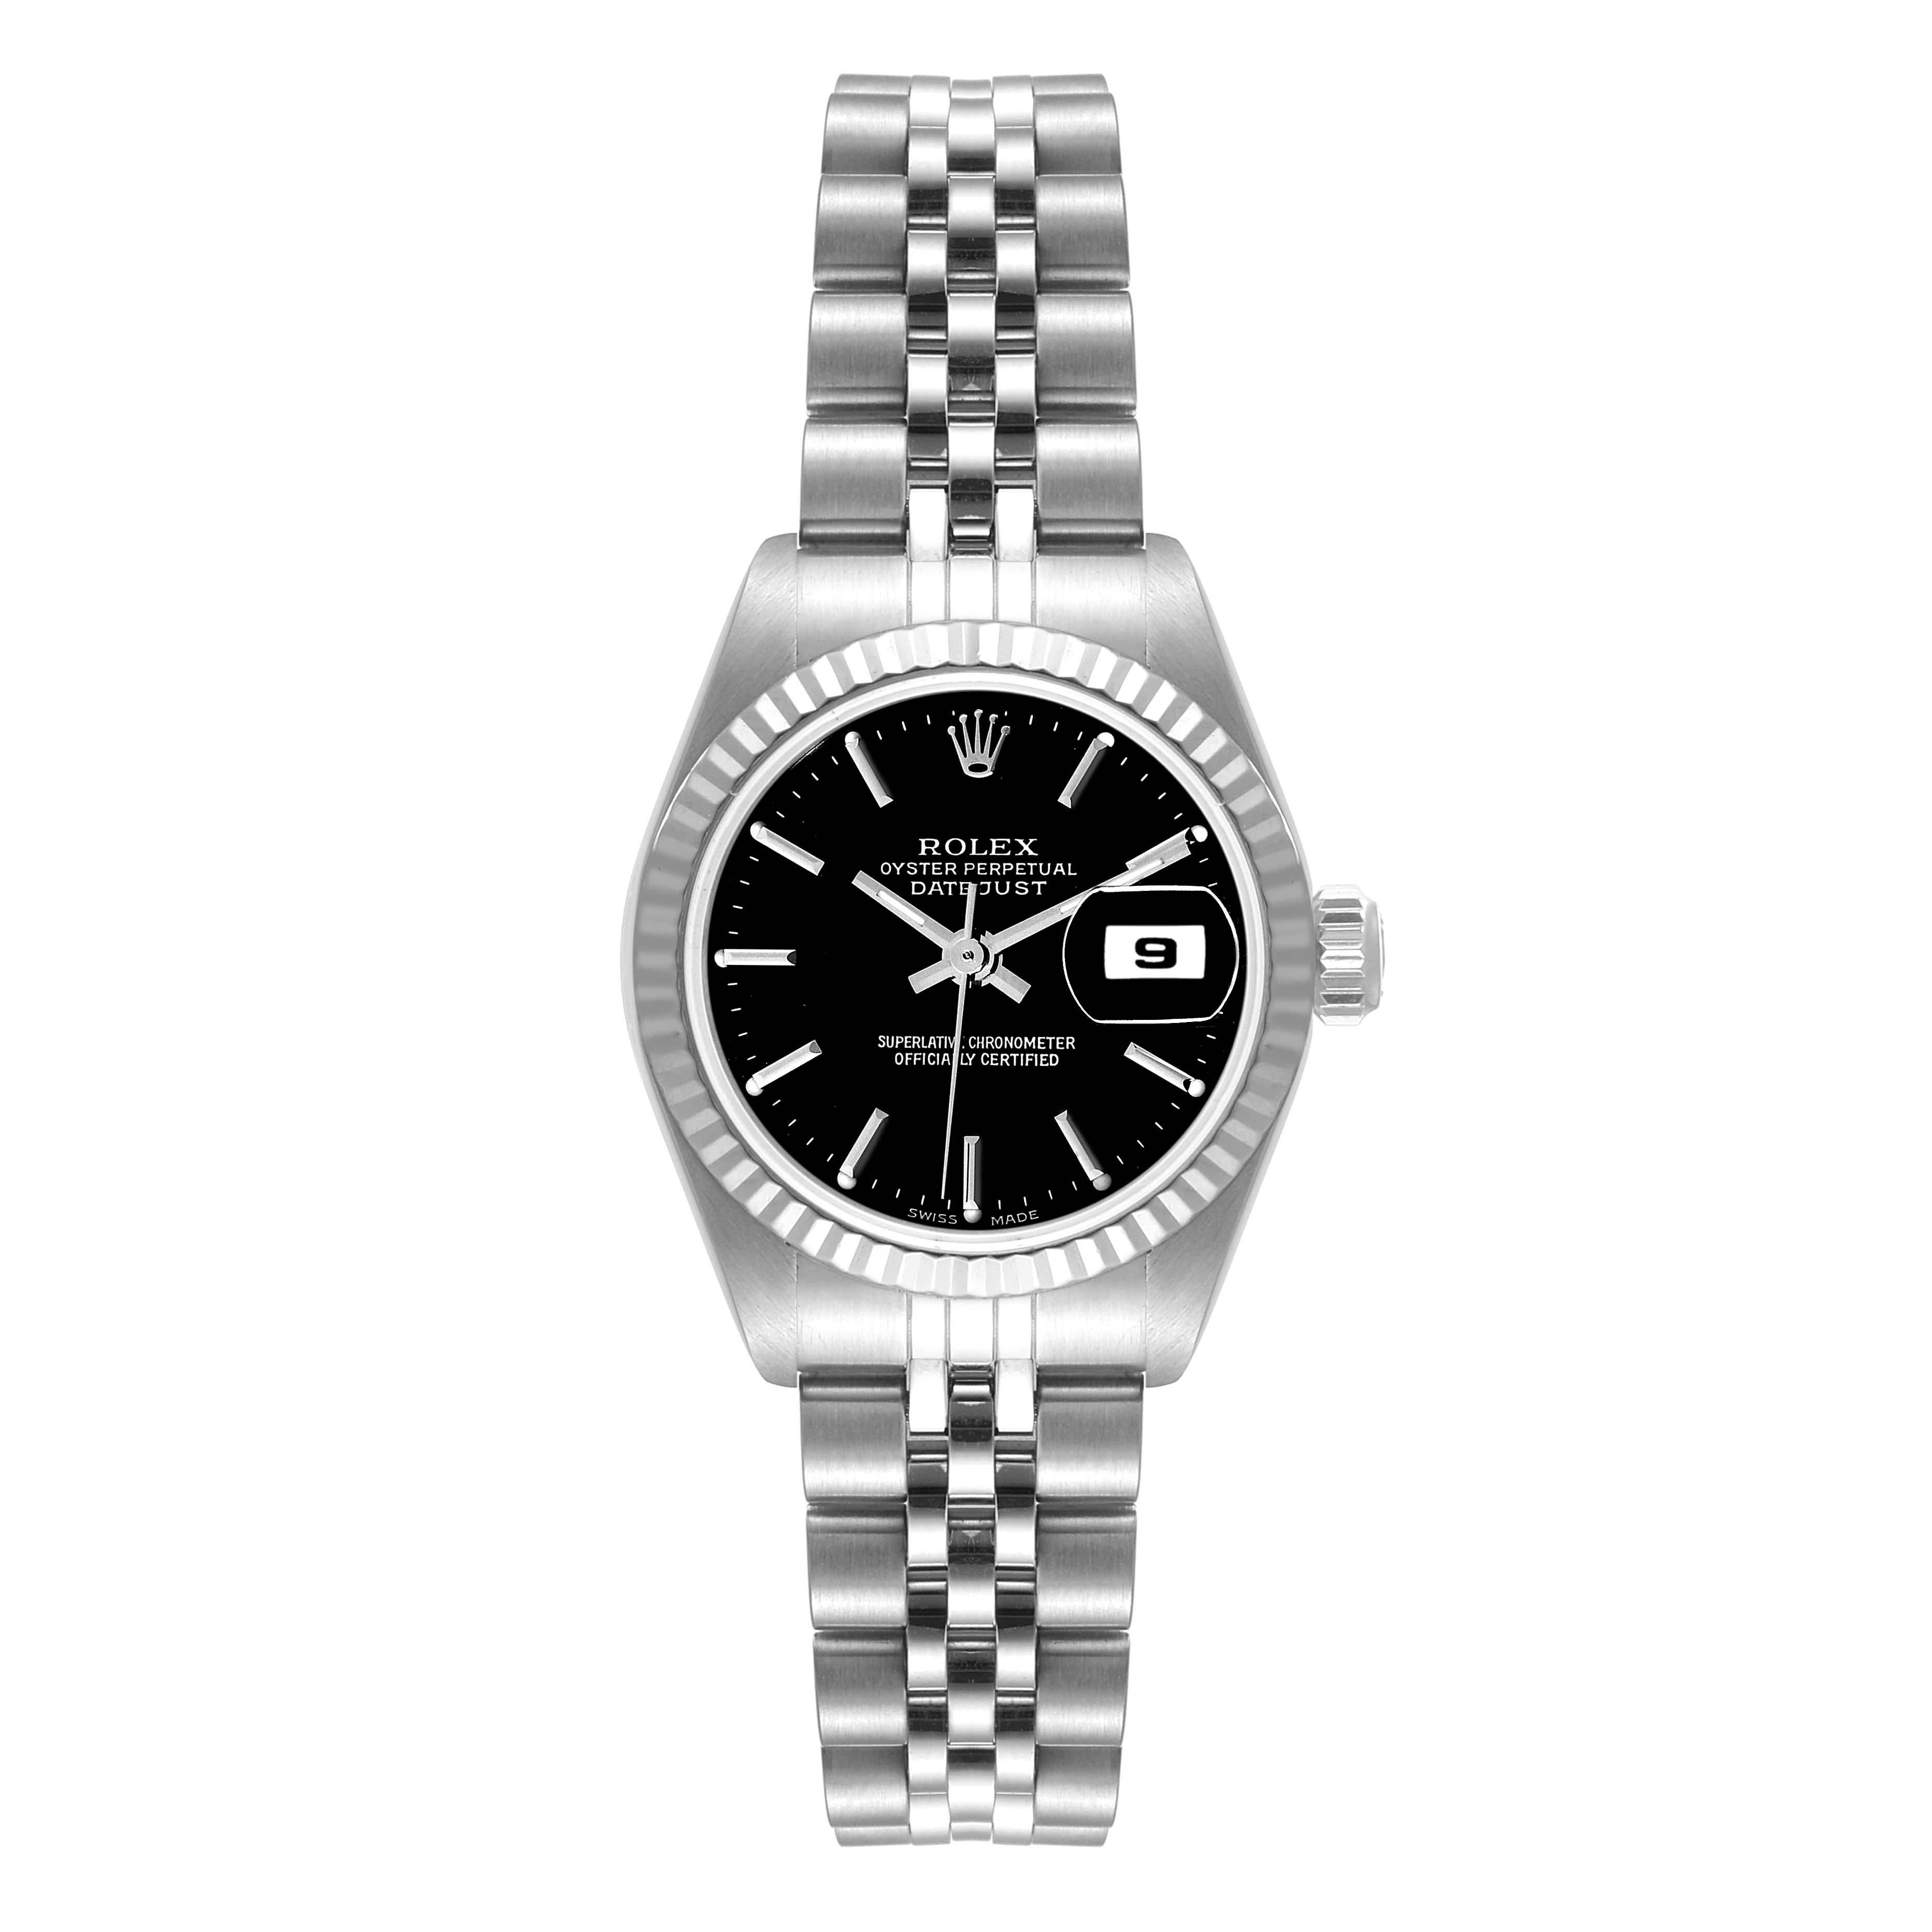 Rolex Datejust 26 Steel White Gold Black Dial Ladies Watch 79174. Officially certified chronometer self-winding movement. Stainless steel oyster case 26.0 mm in diameter. Rolex logo on a crown. Stainless steel oyster case 26.0 mm in diameter. Rolex